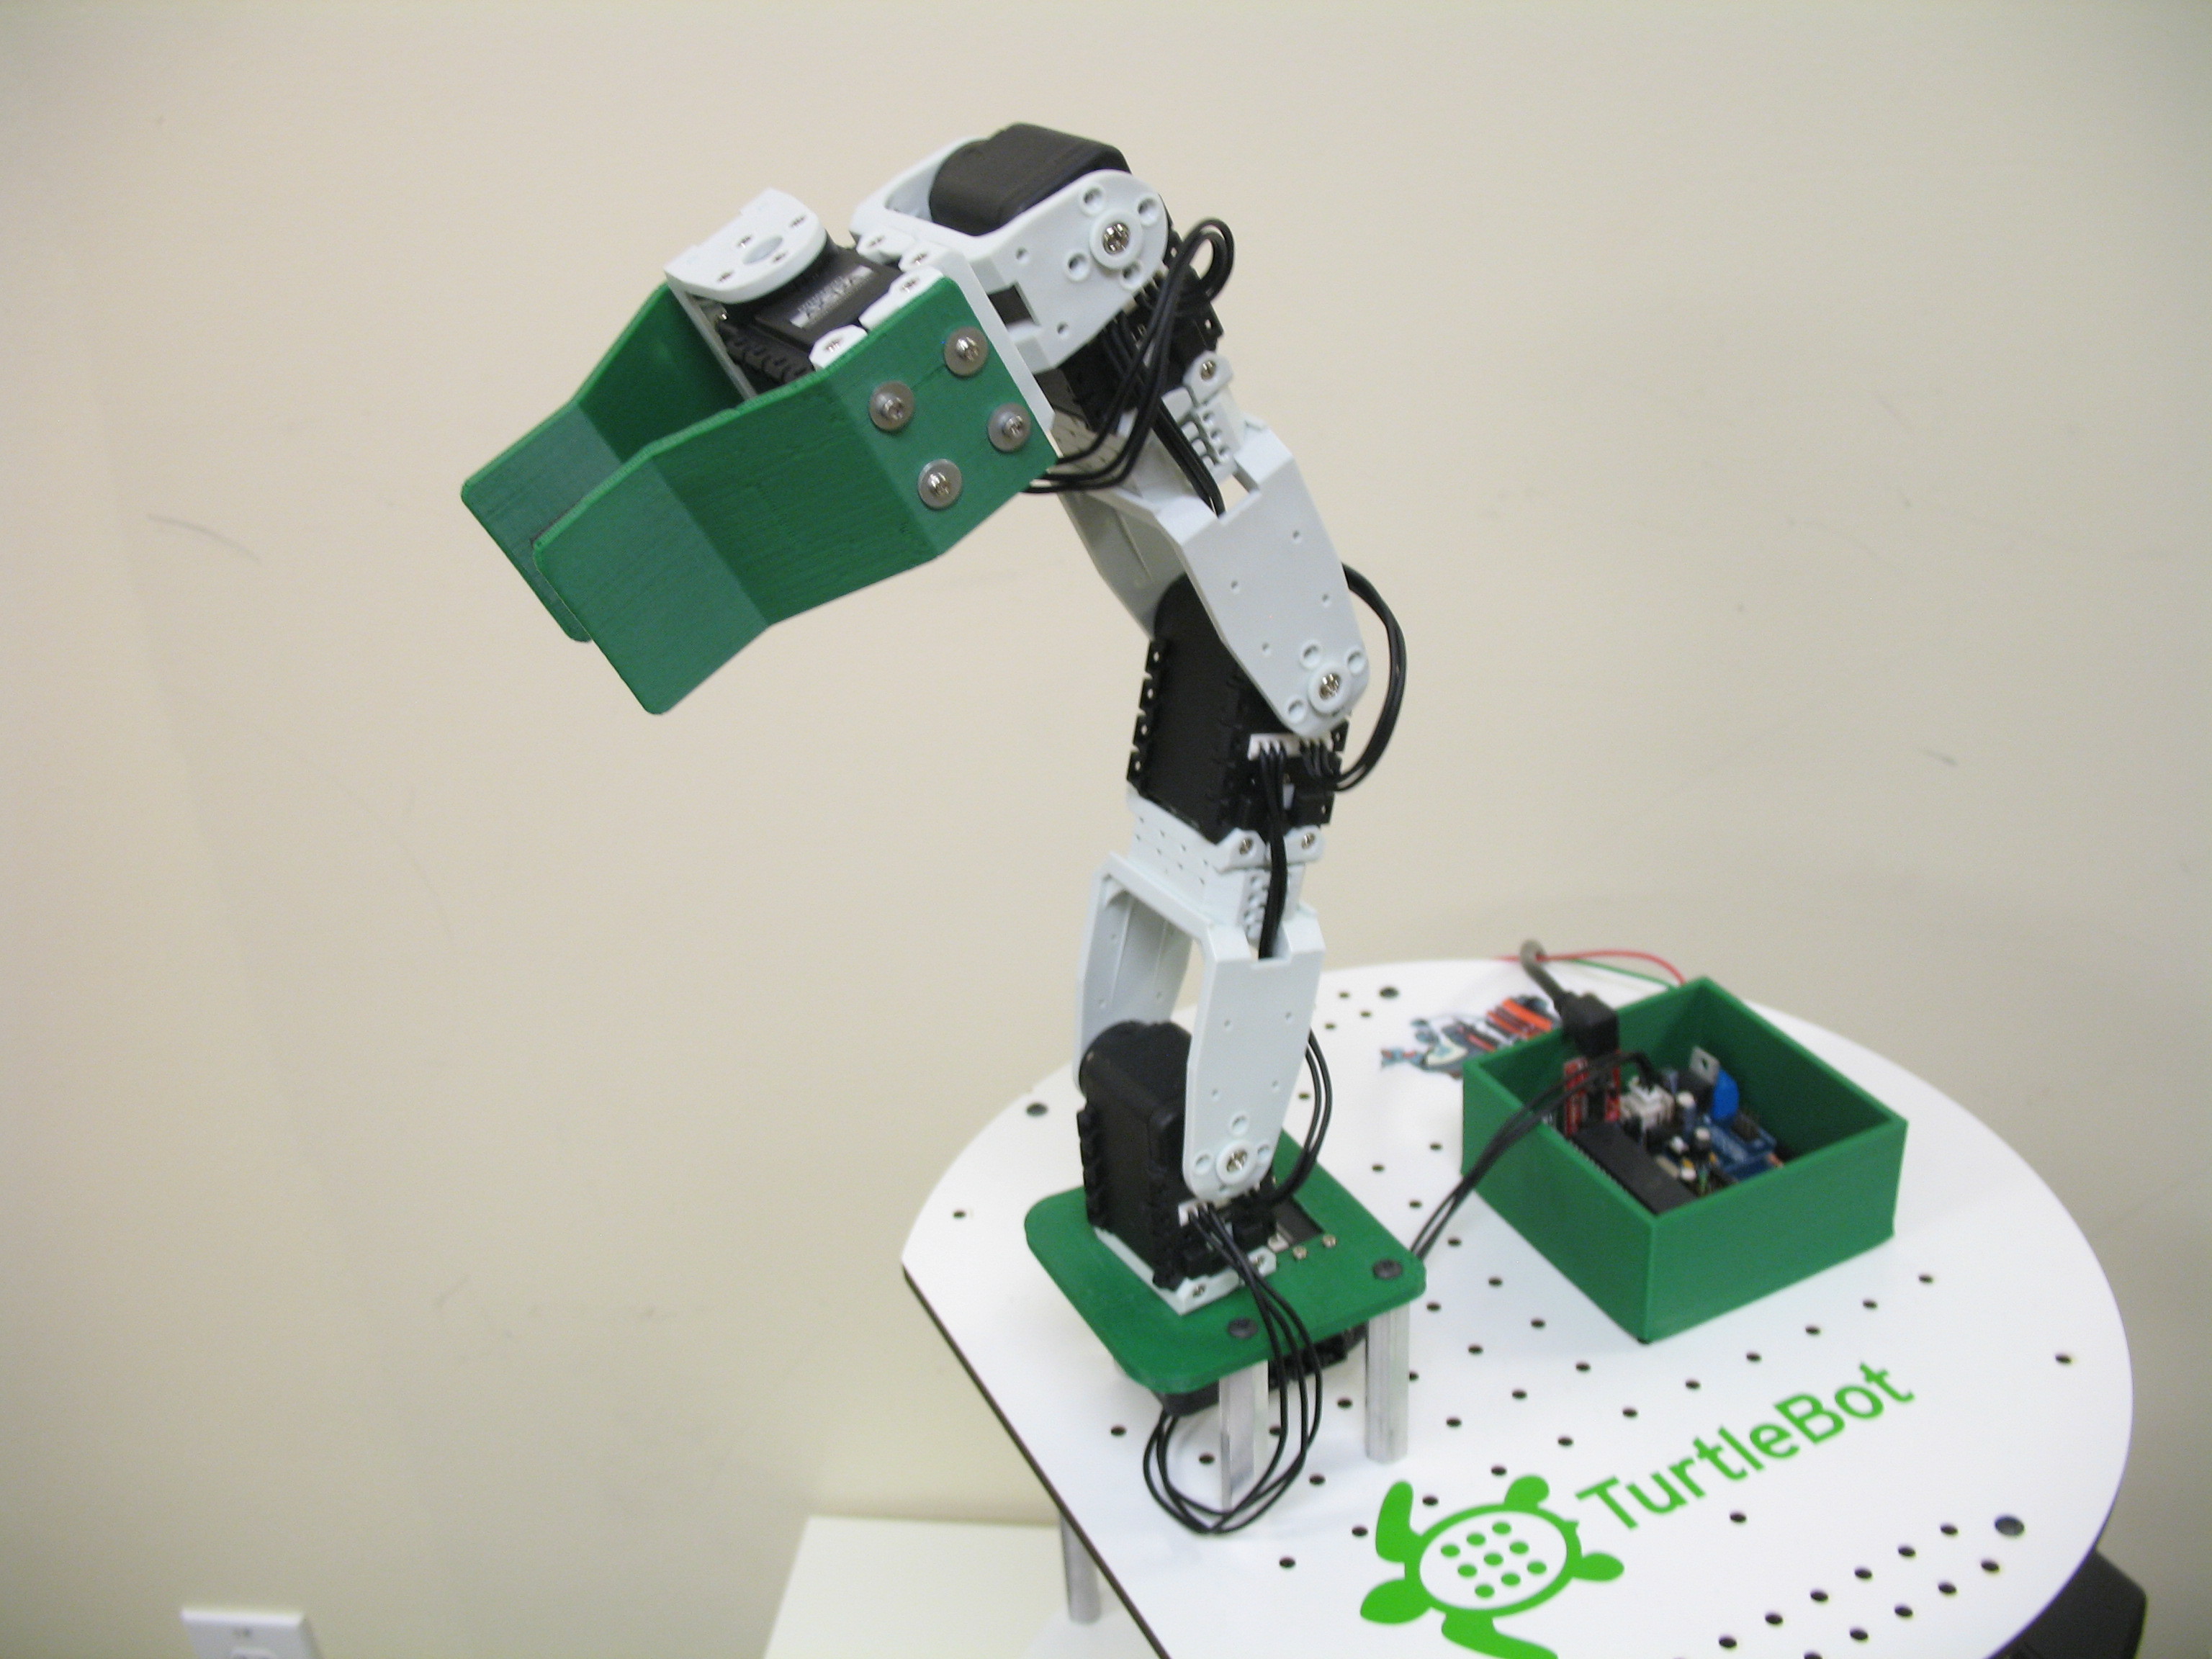 Wiring and Attaching an Arm to Your TurtleBot